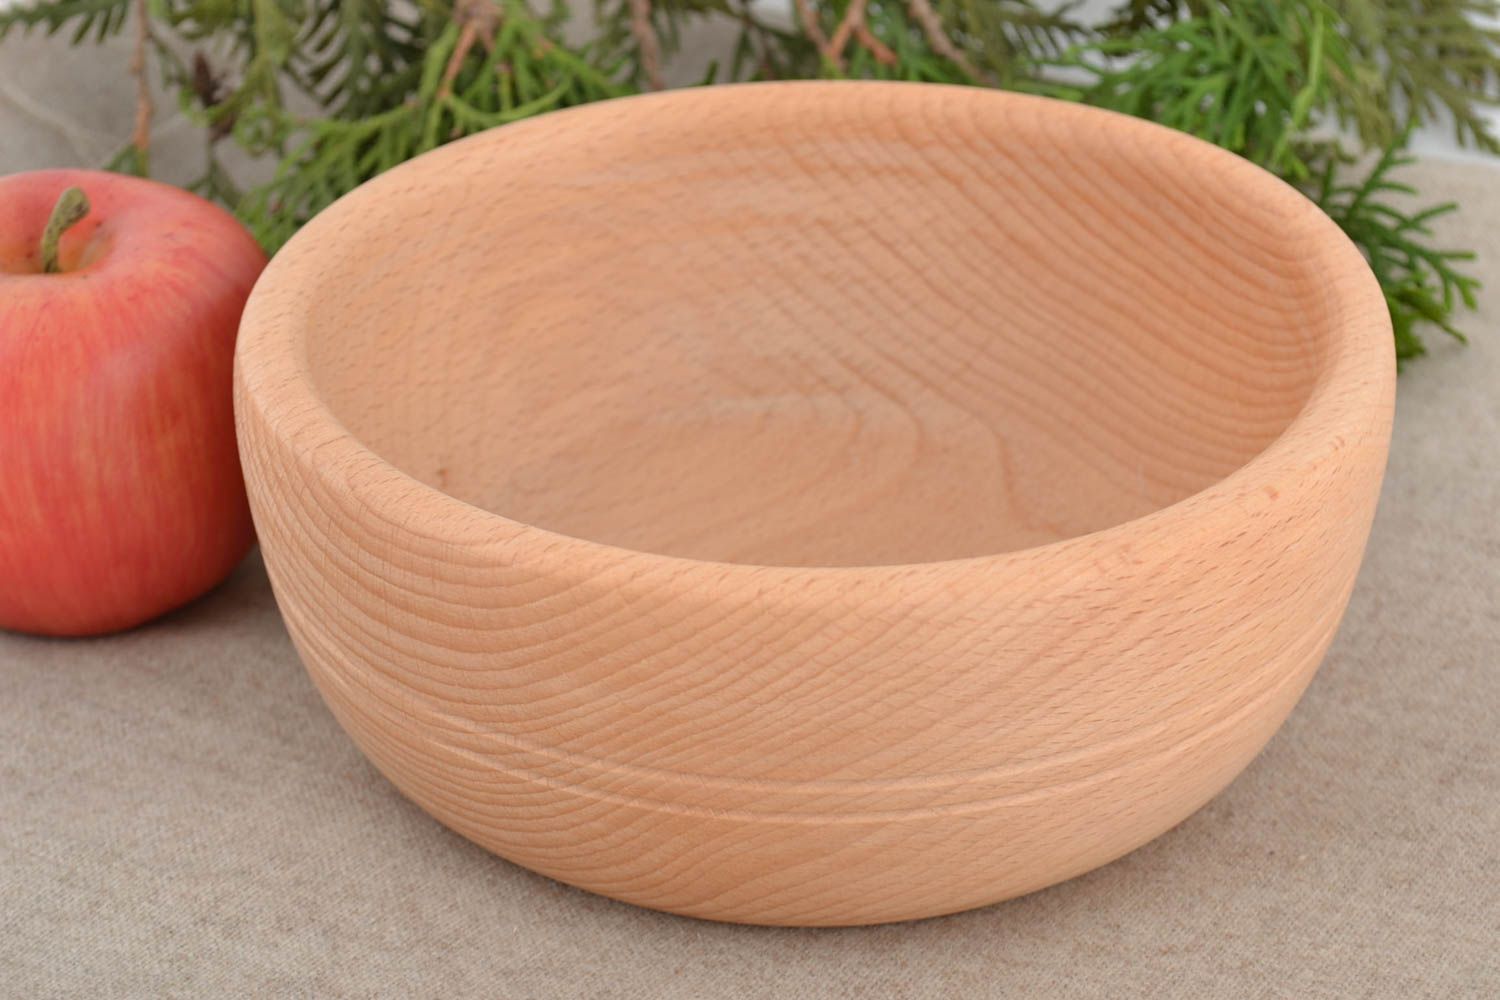 Handmade beautiful eco friendly wooden bowl for soups and salads 700 ml photo 1